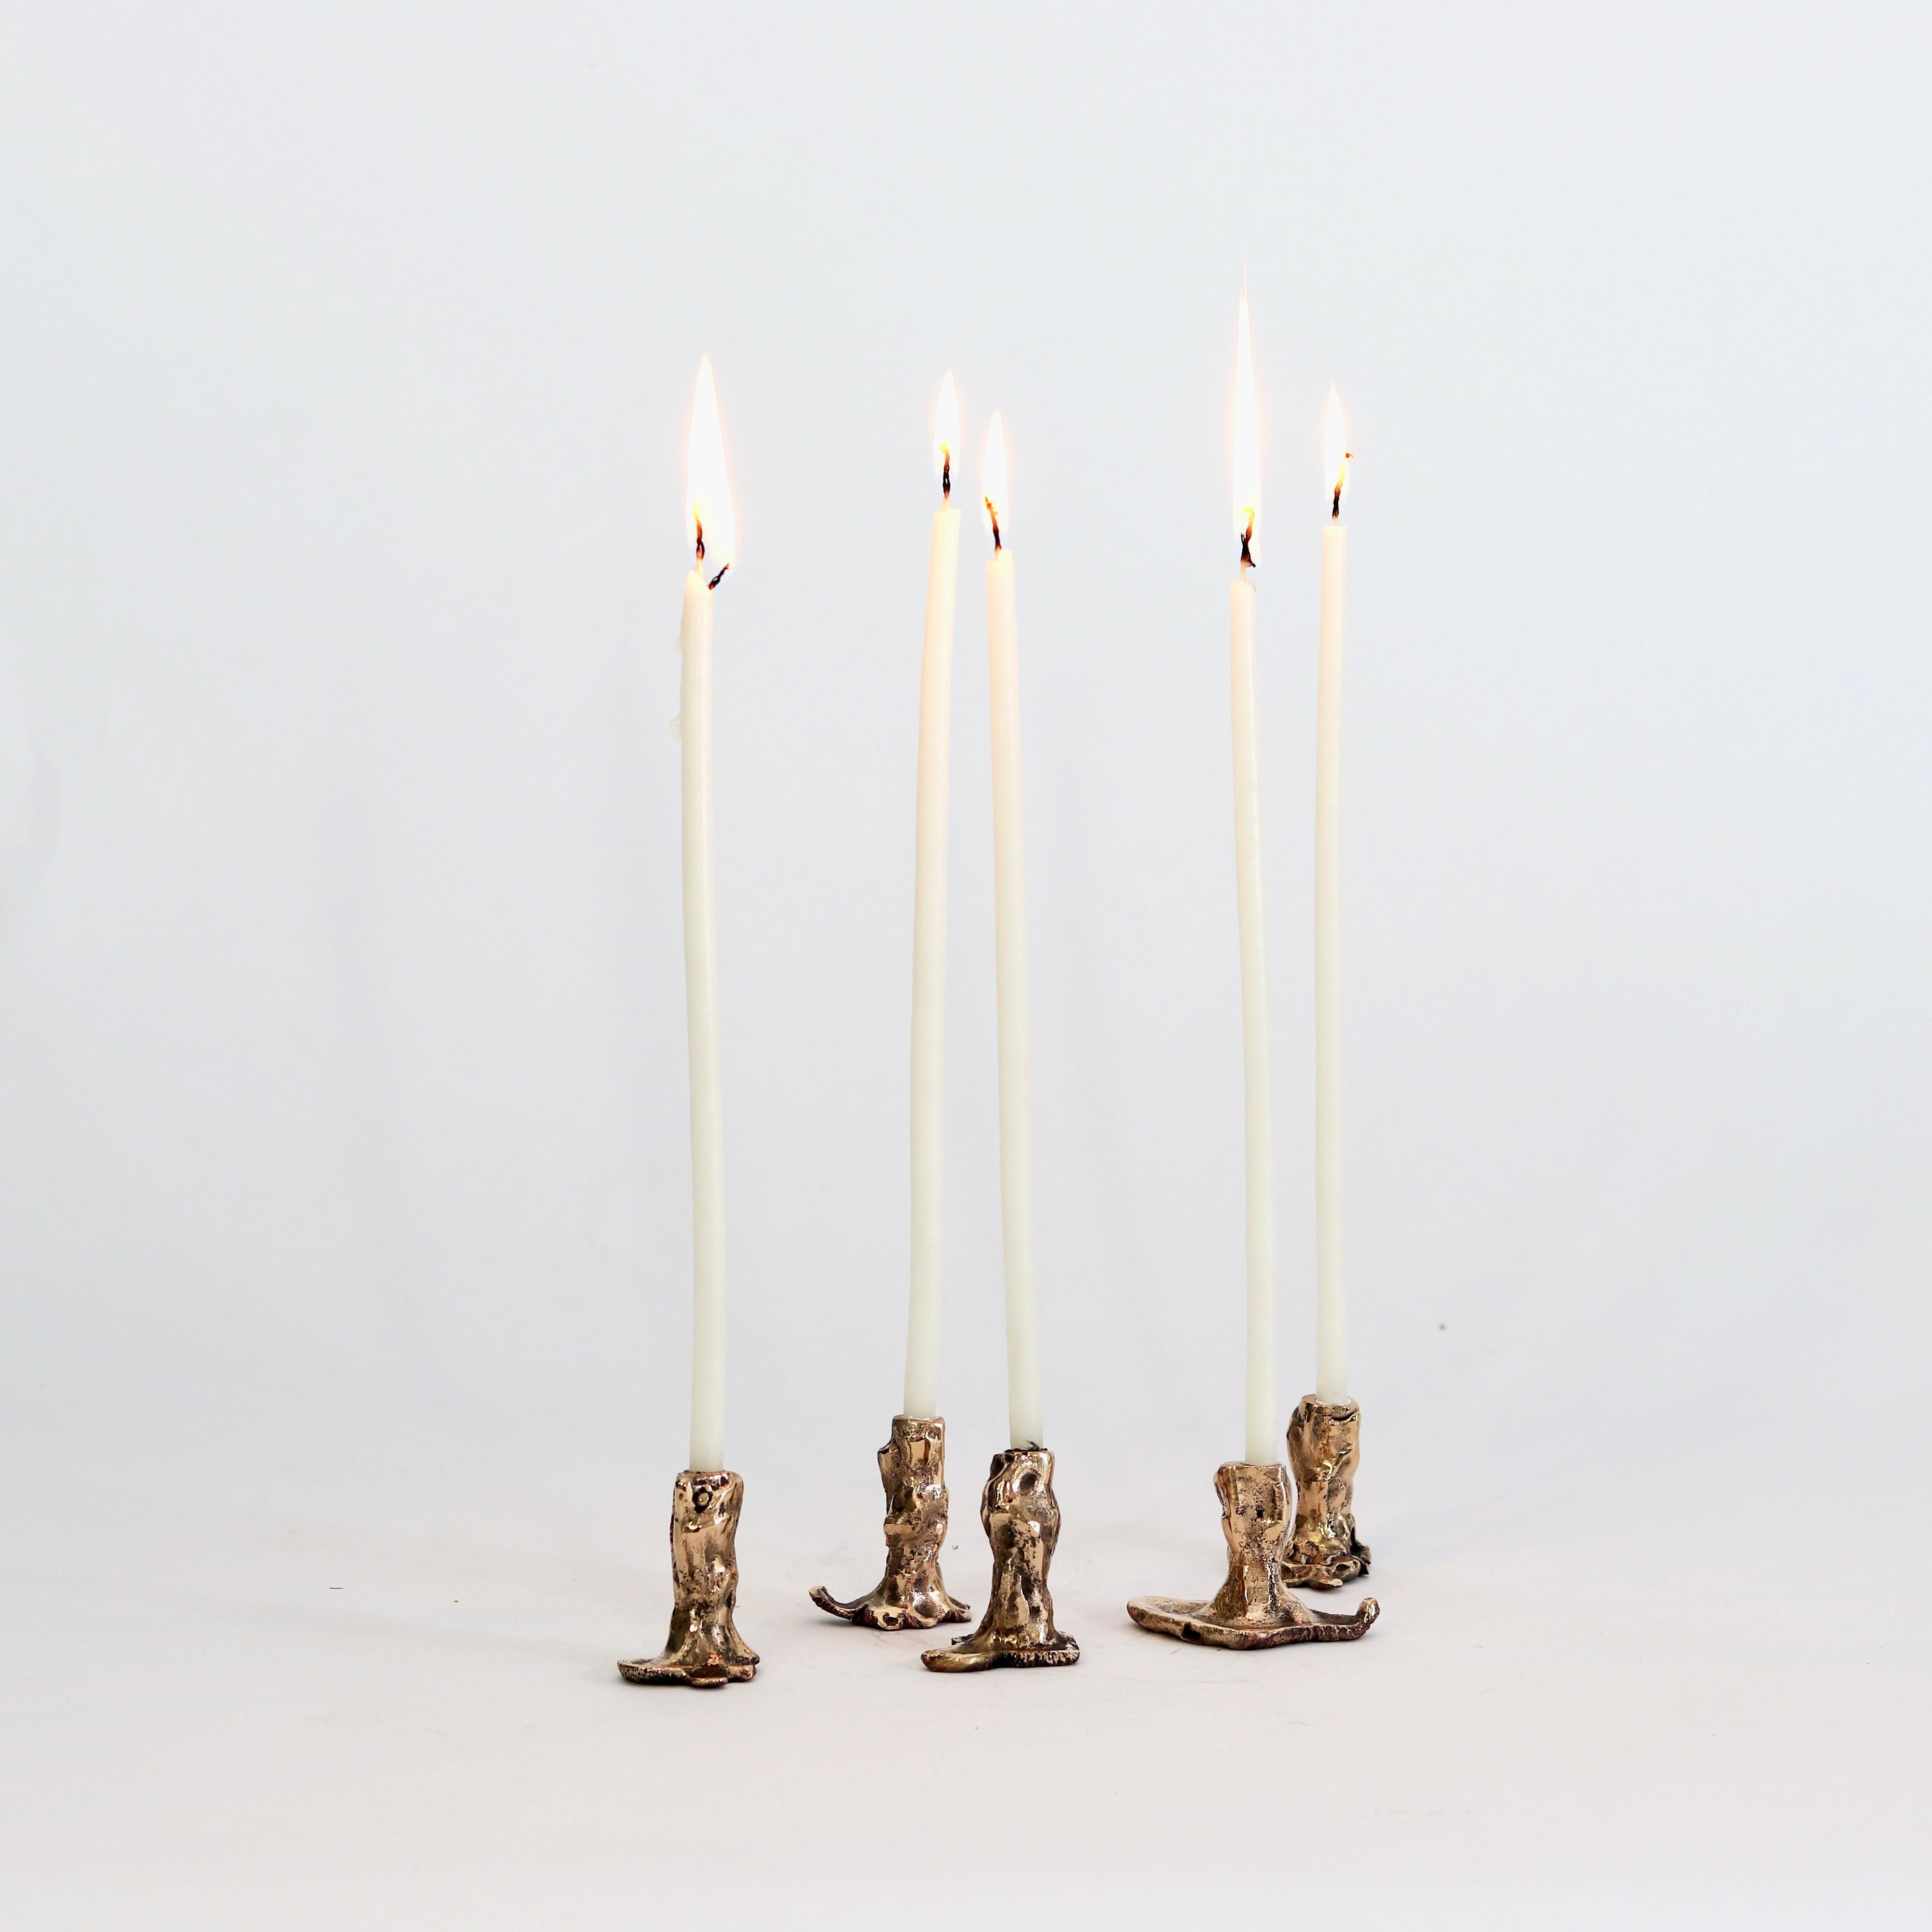 Set of 5 Pixie bornze candleholders by Samuel Costantini
Dimensions: D 2.5 cm x H 5 cm
Material: Bronze

Samuel Constantini
The ability to create objects lies in the tradition in our hands. In ancient times, they were our only means of